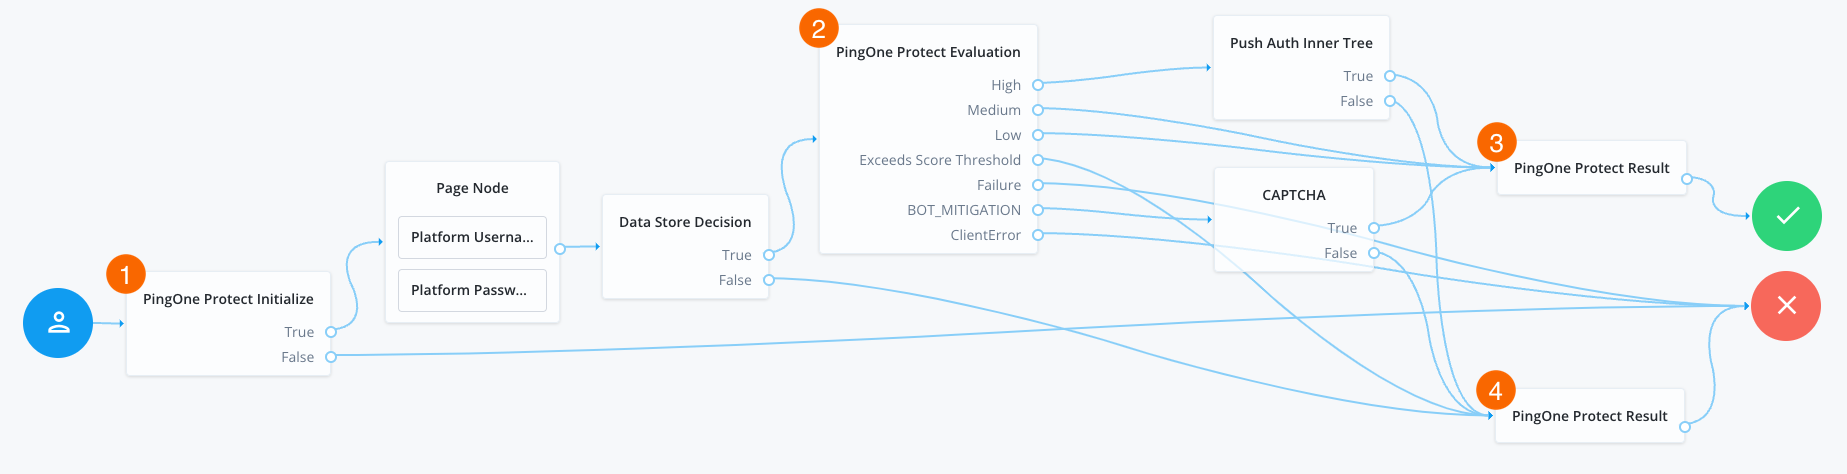 Example PingOne Protect journey